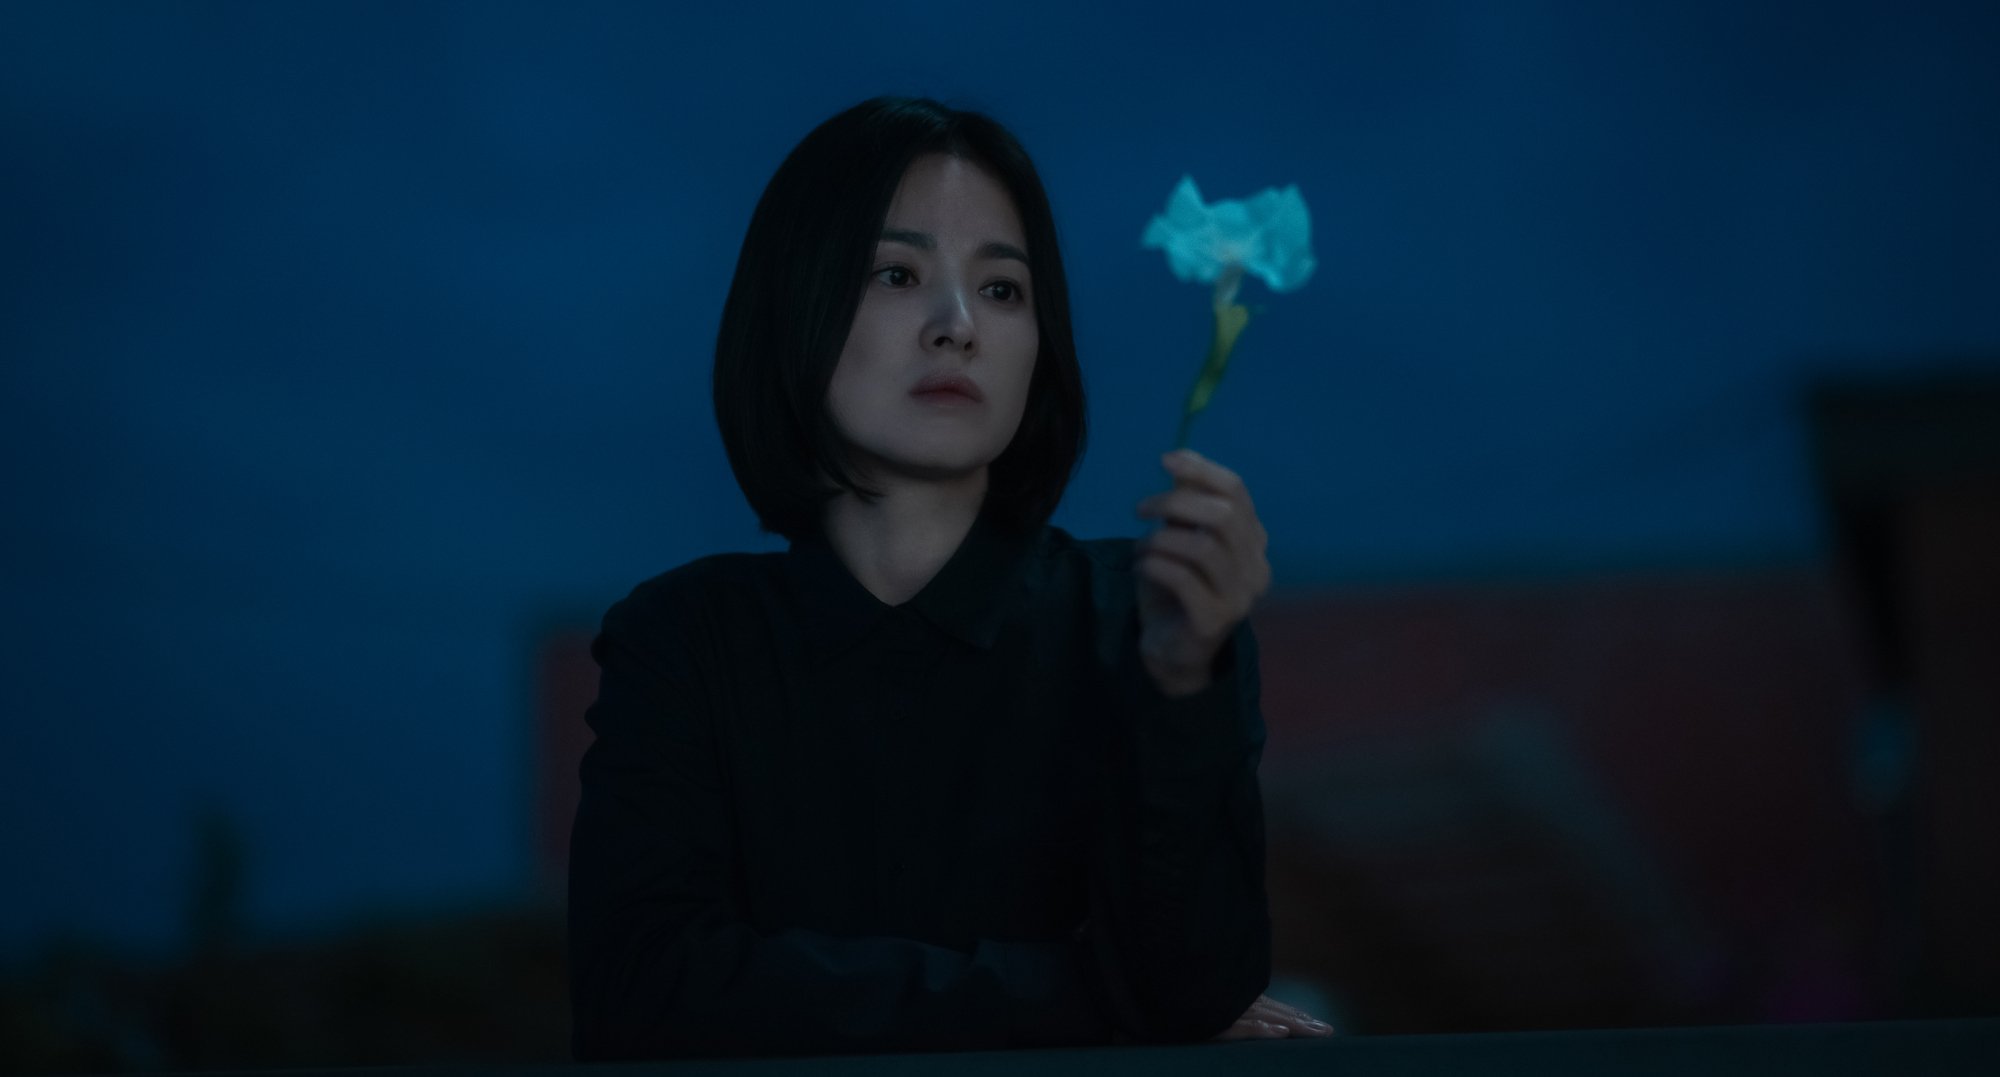 Song Hye-kyo as Dong-eun in 'The Glory' Part 1 K-drama.